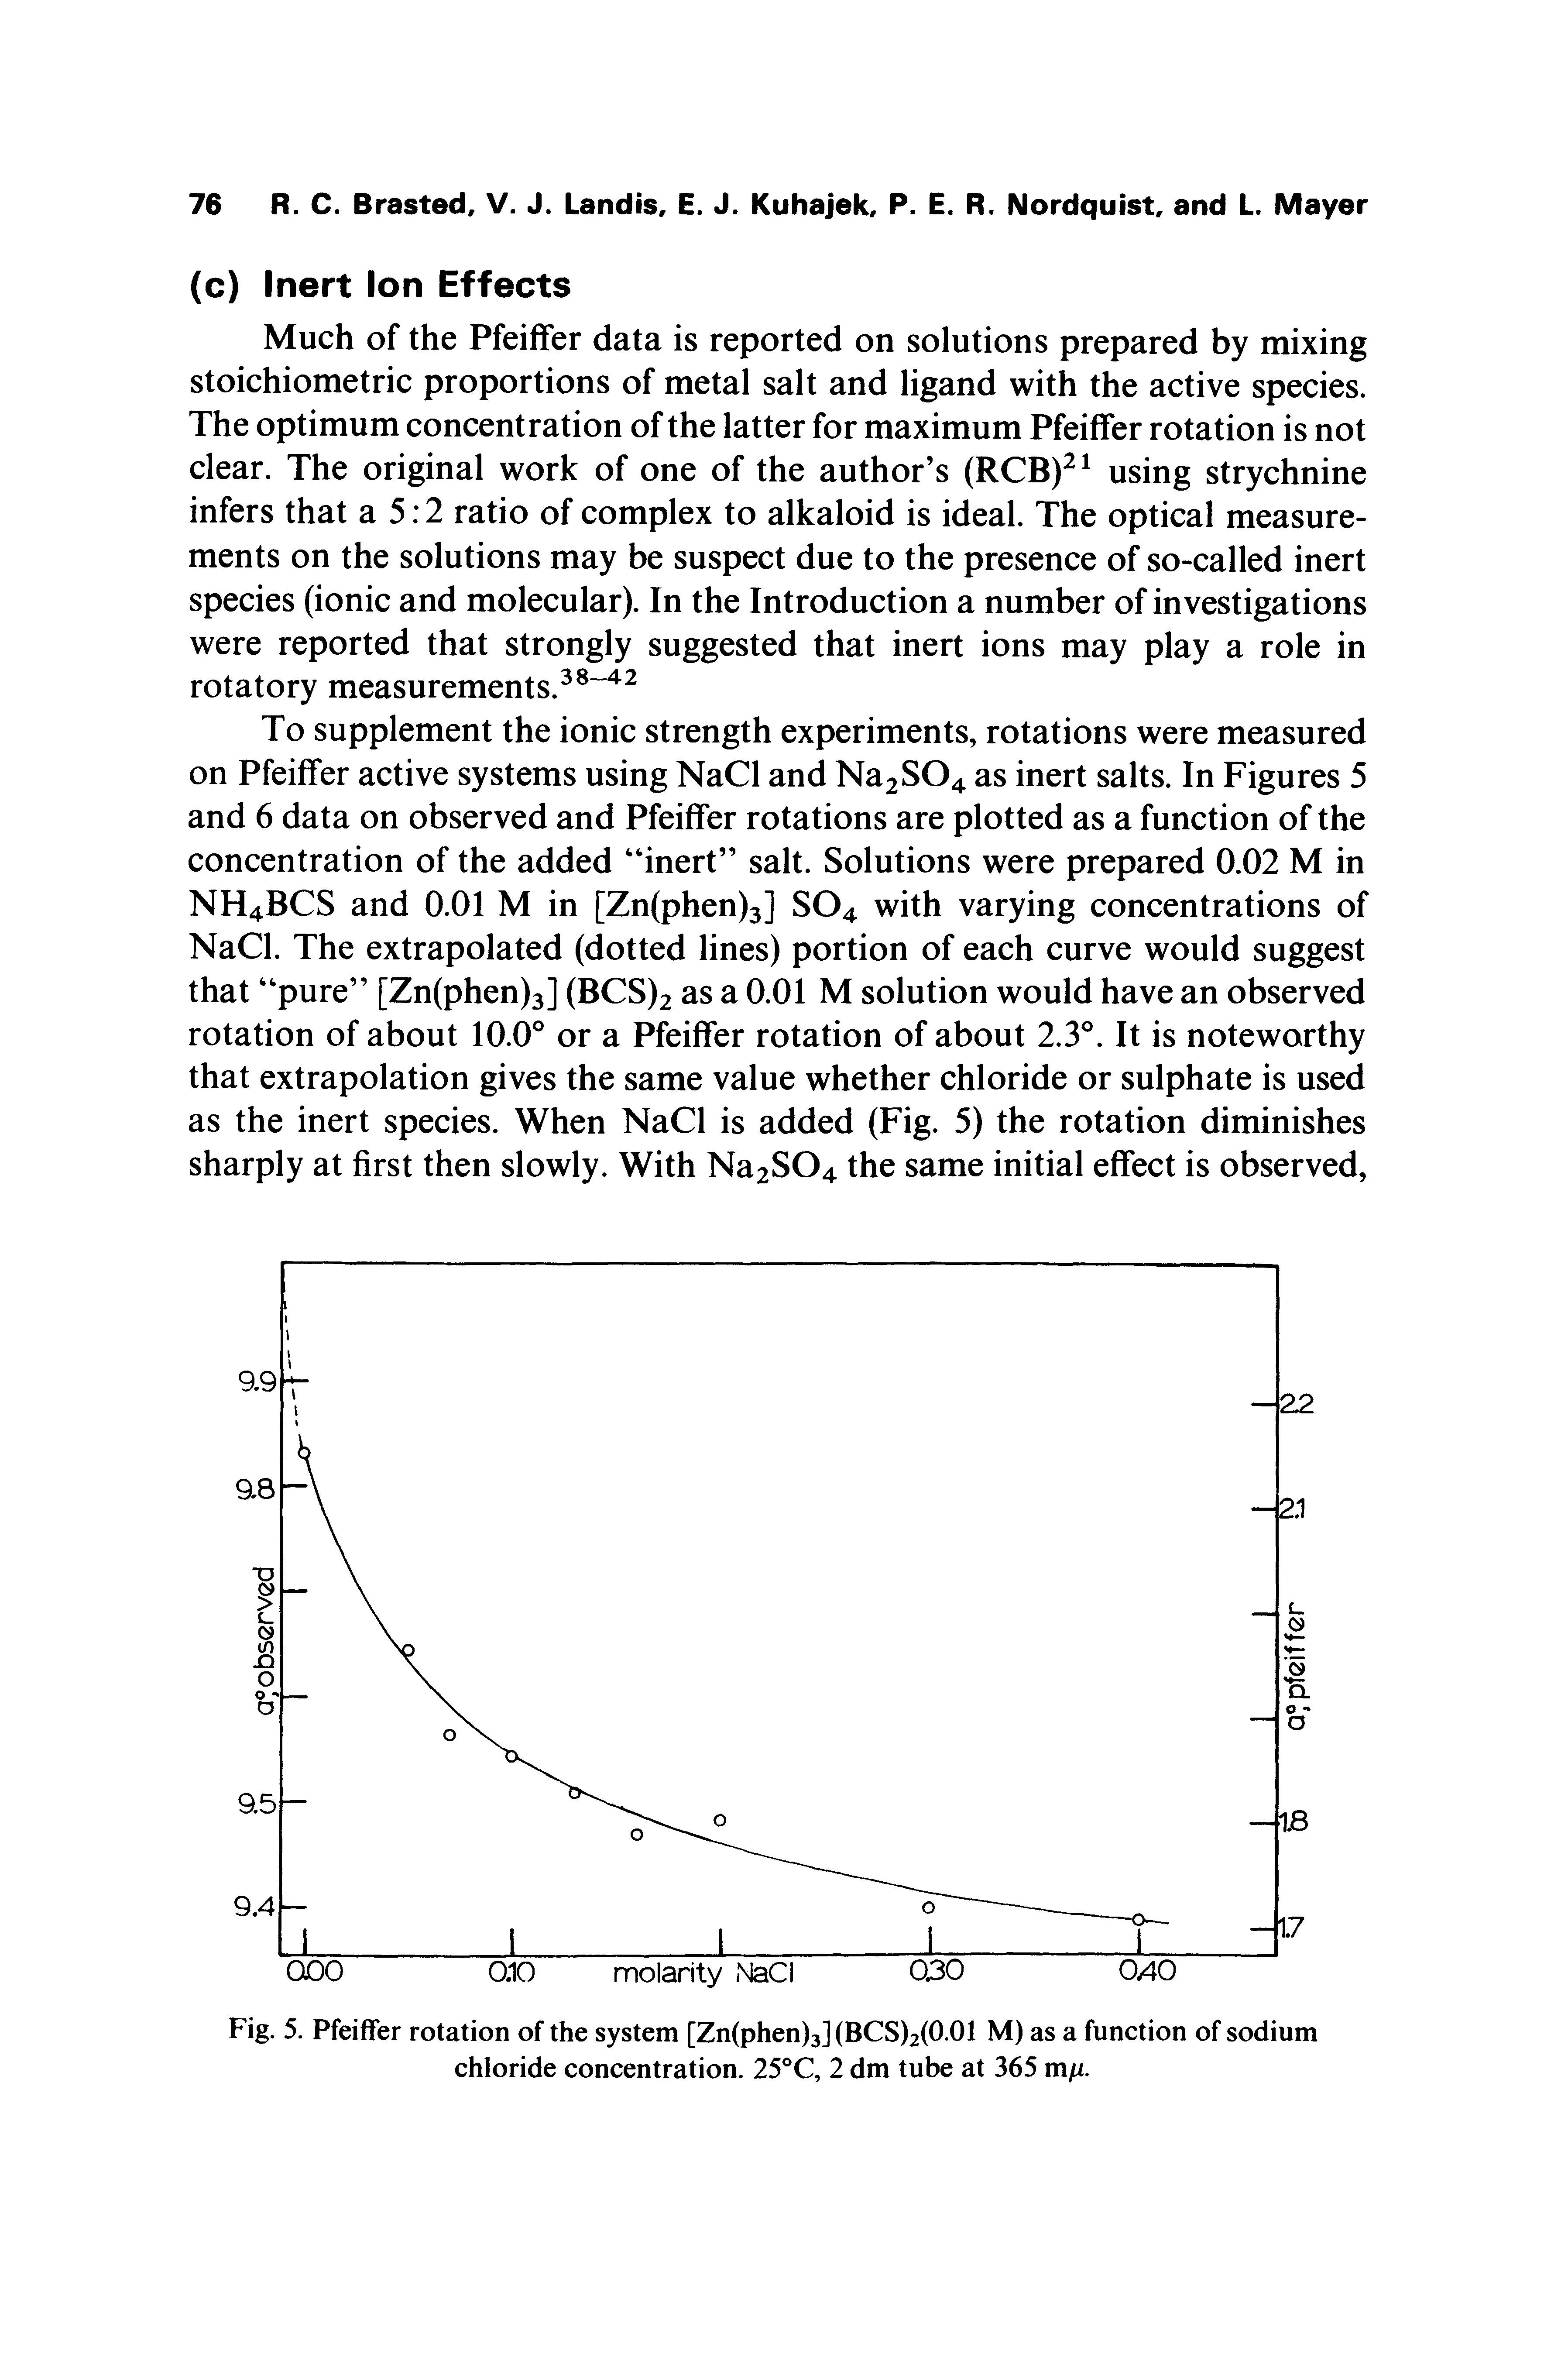 Fig. 5. Pfeiffer rotation of the system [Zn(phen)3] (BCS)2(0.01 M) as a function of sodium chloride concentration. 25°C, 2 dm tube at 365 mfi.